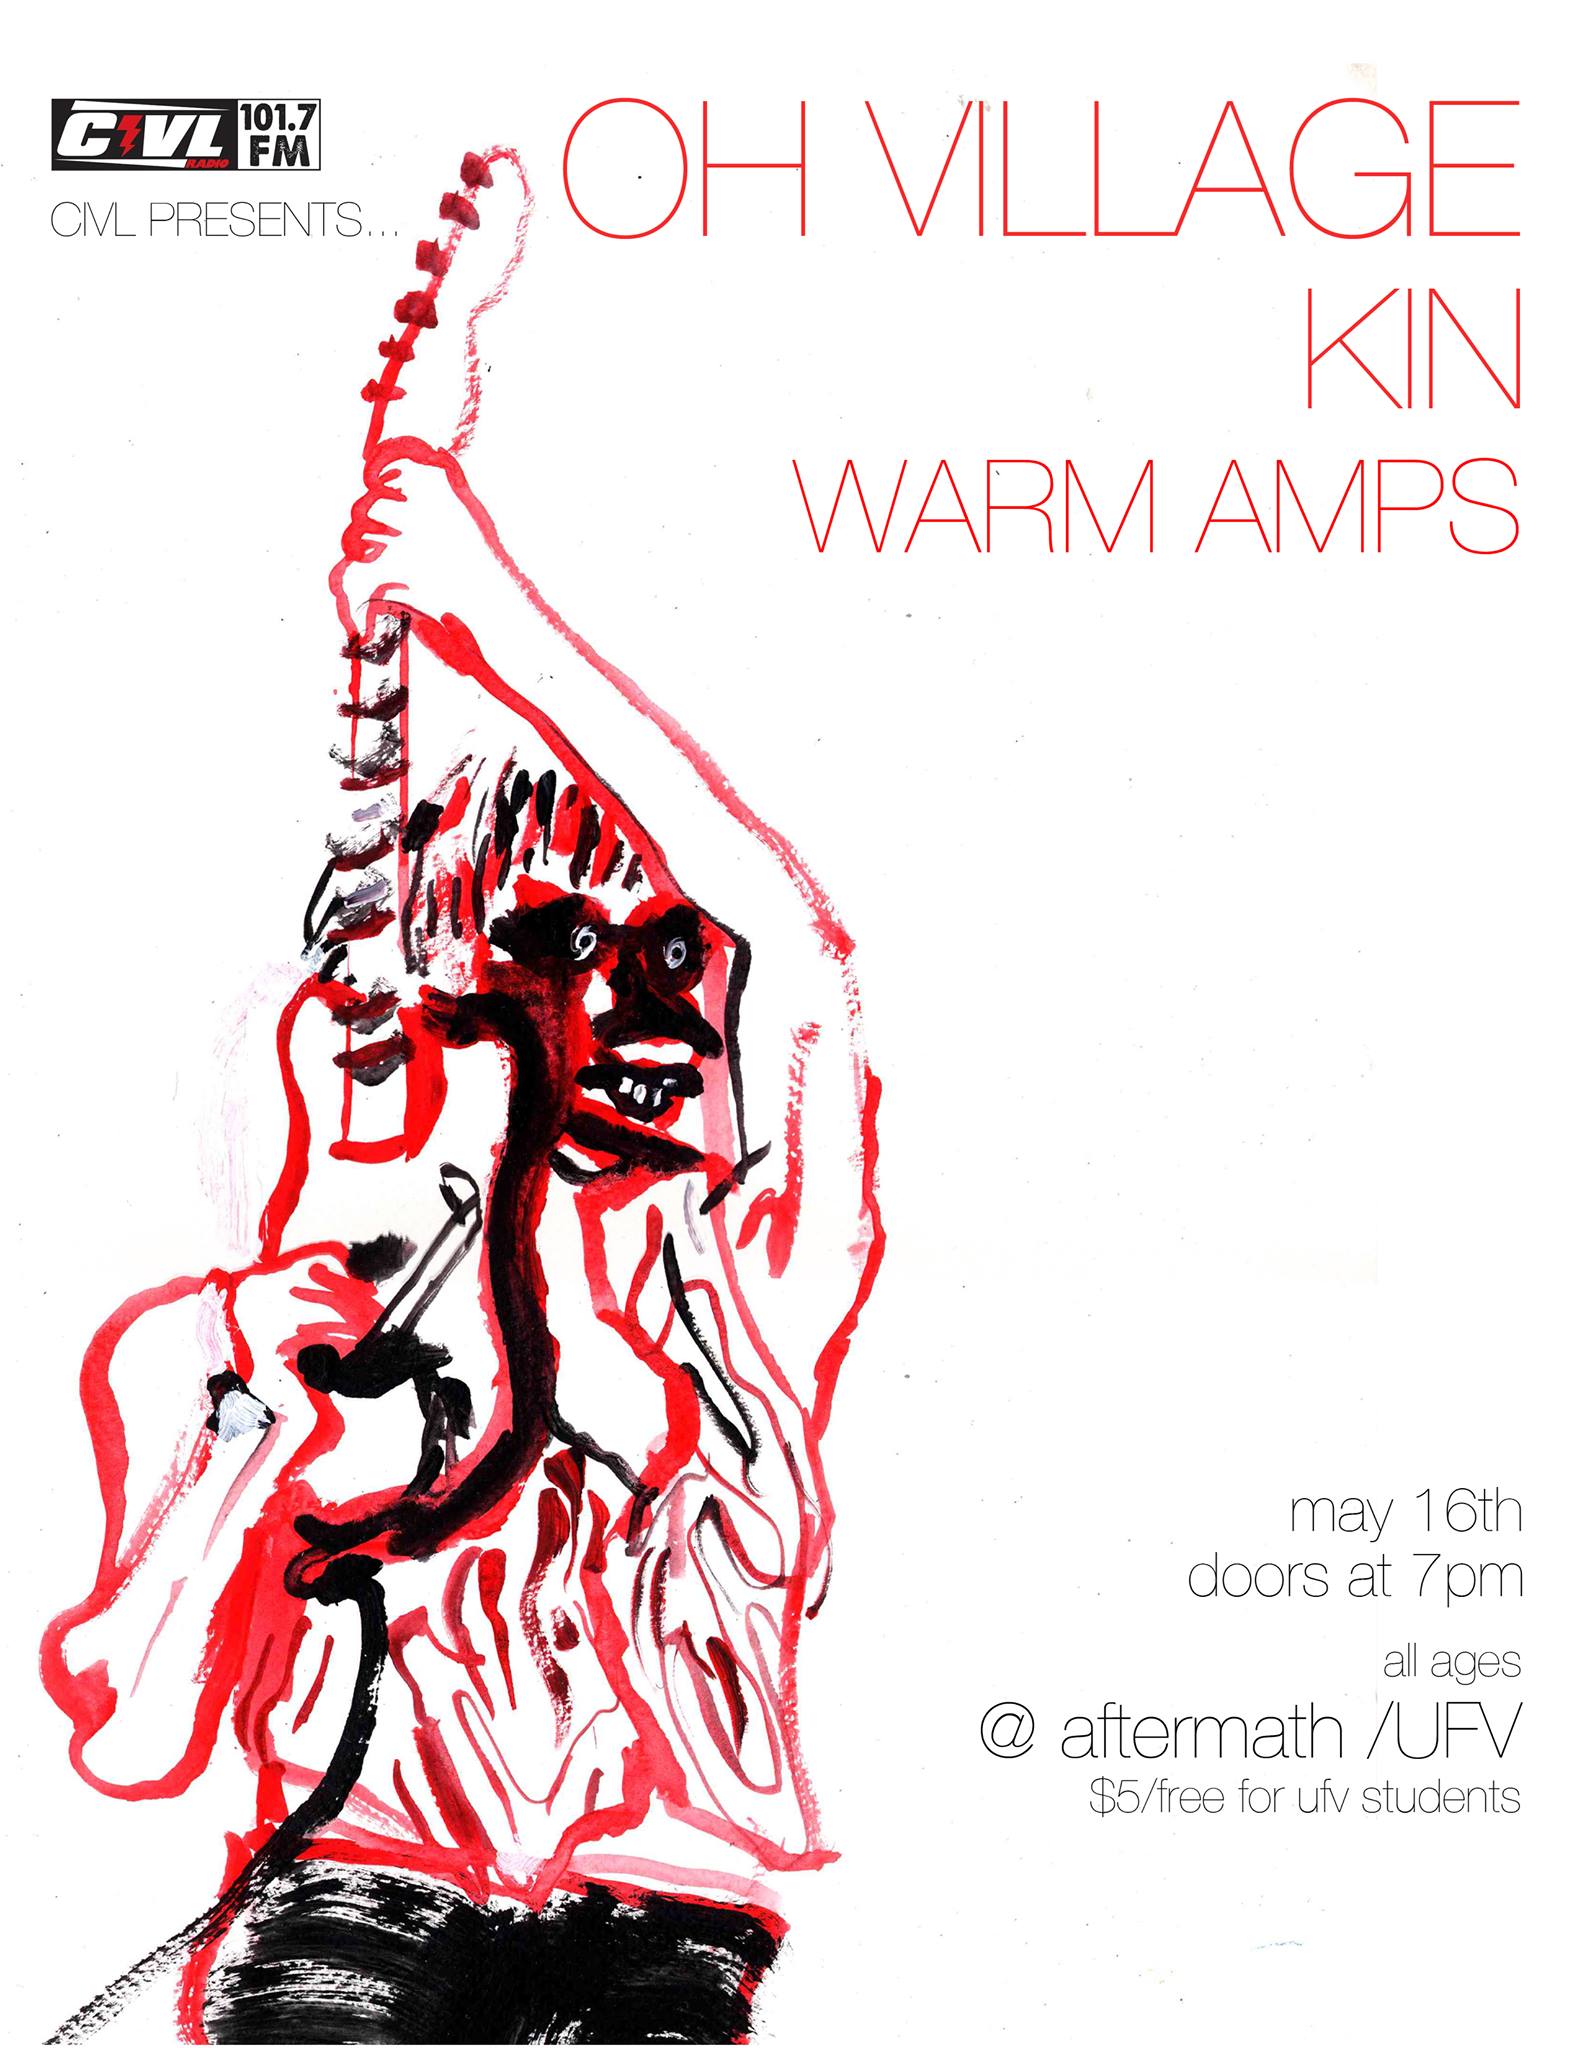 Local indie rockers Warm Amps, Kin, and Oh Village strike a balance between folk and rock